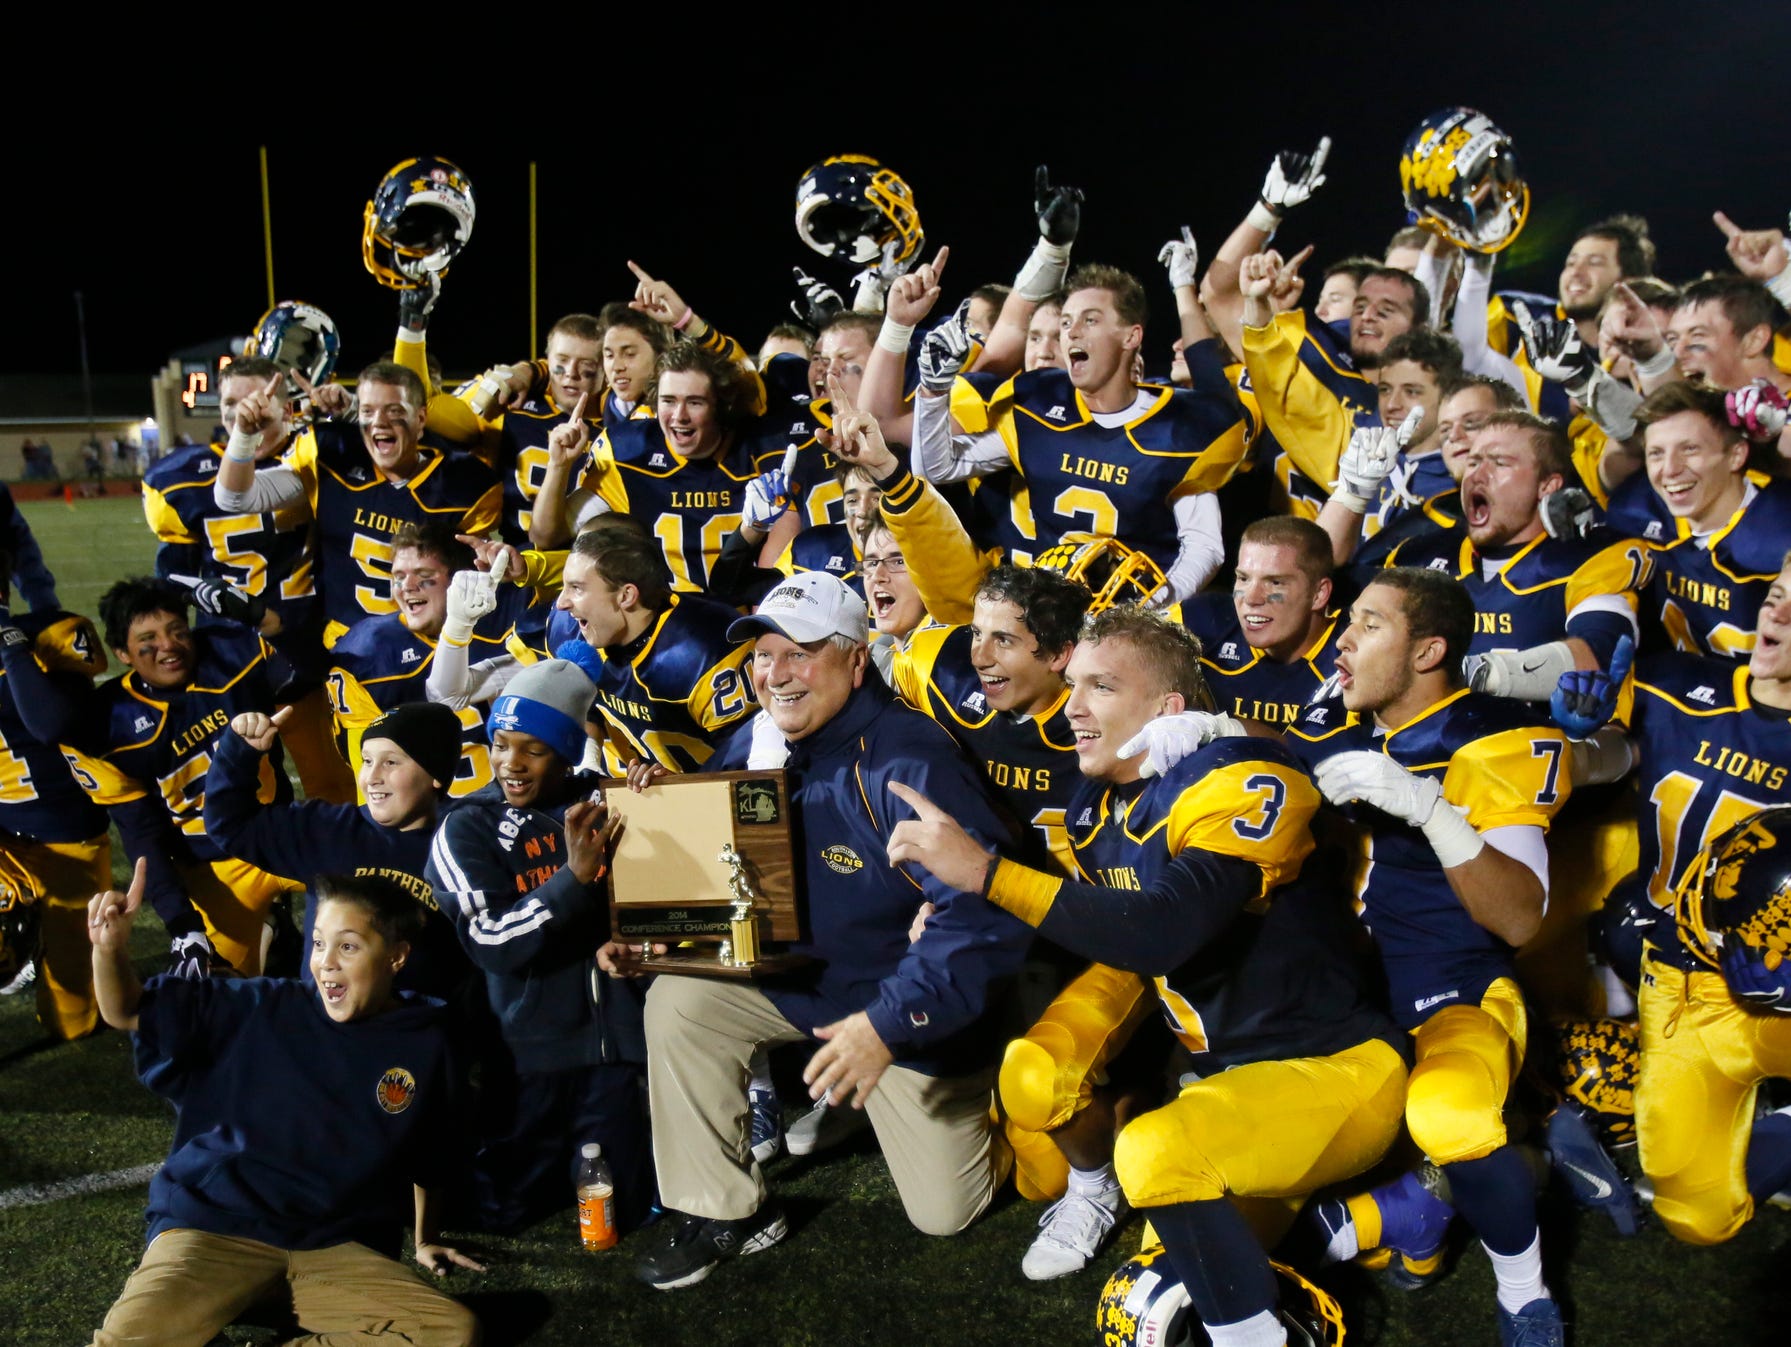 South Lyon coach Mark Thomas holds the district championship trophy as he and his players pose for photos to celebrate their 17-7 win over Canton on Oct. 17, 2014.